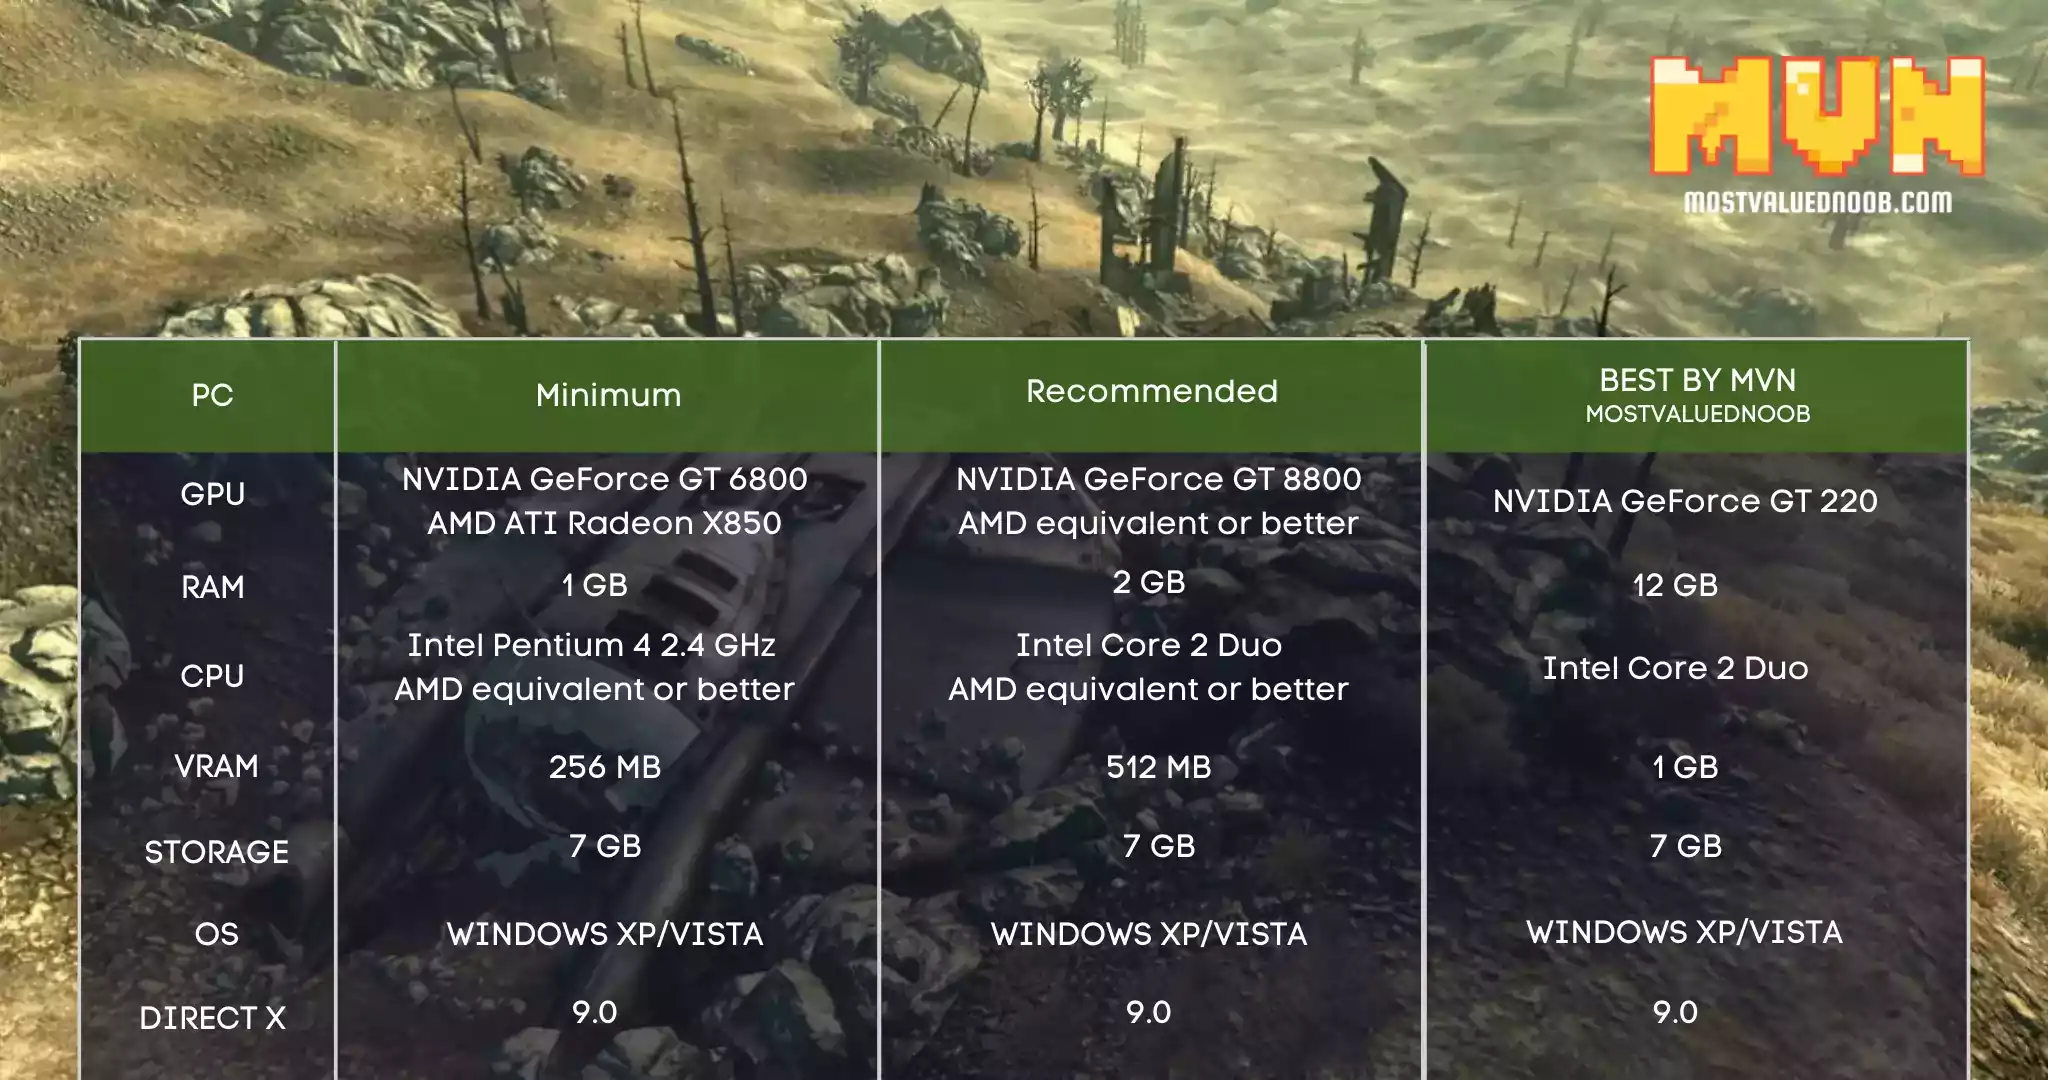 Fallout 3 system requirements